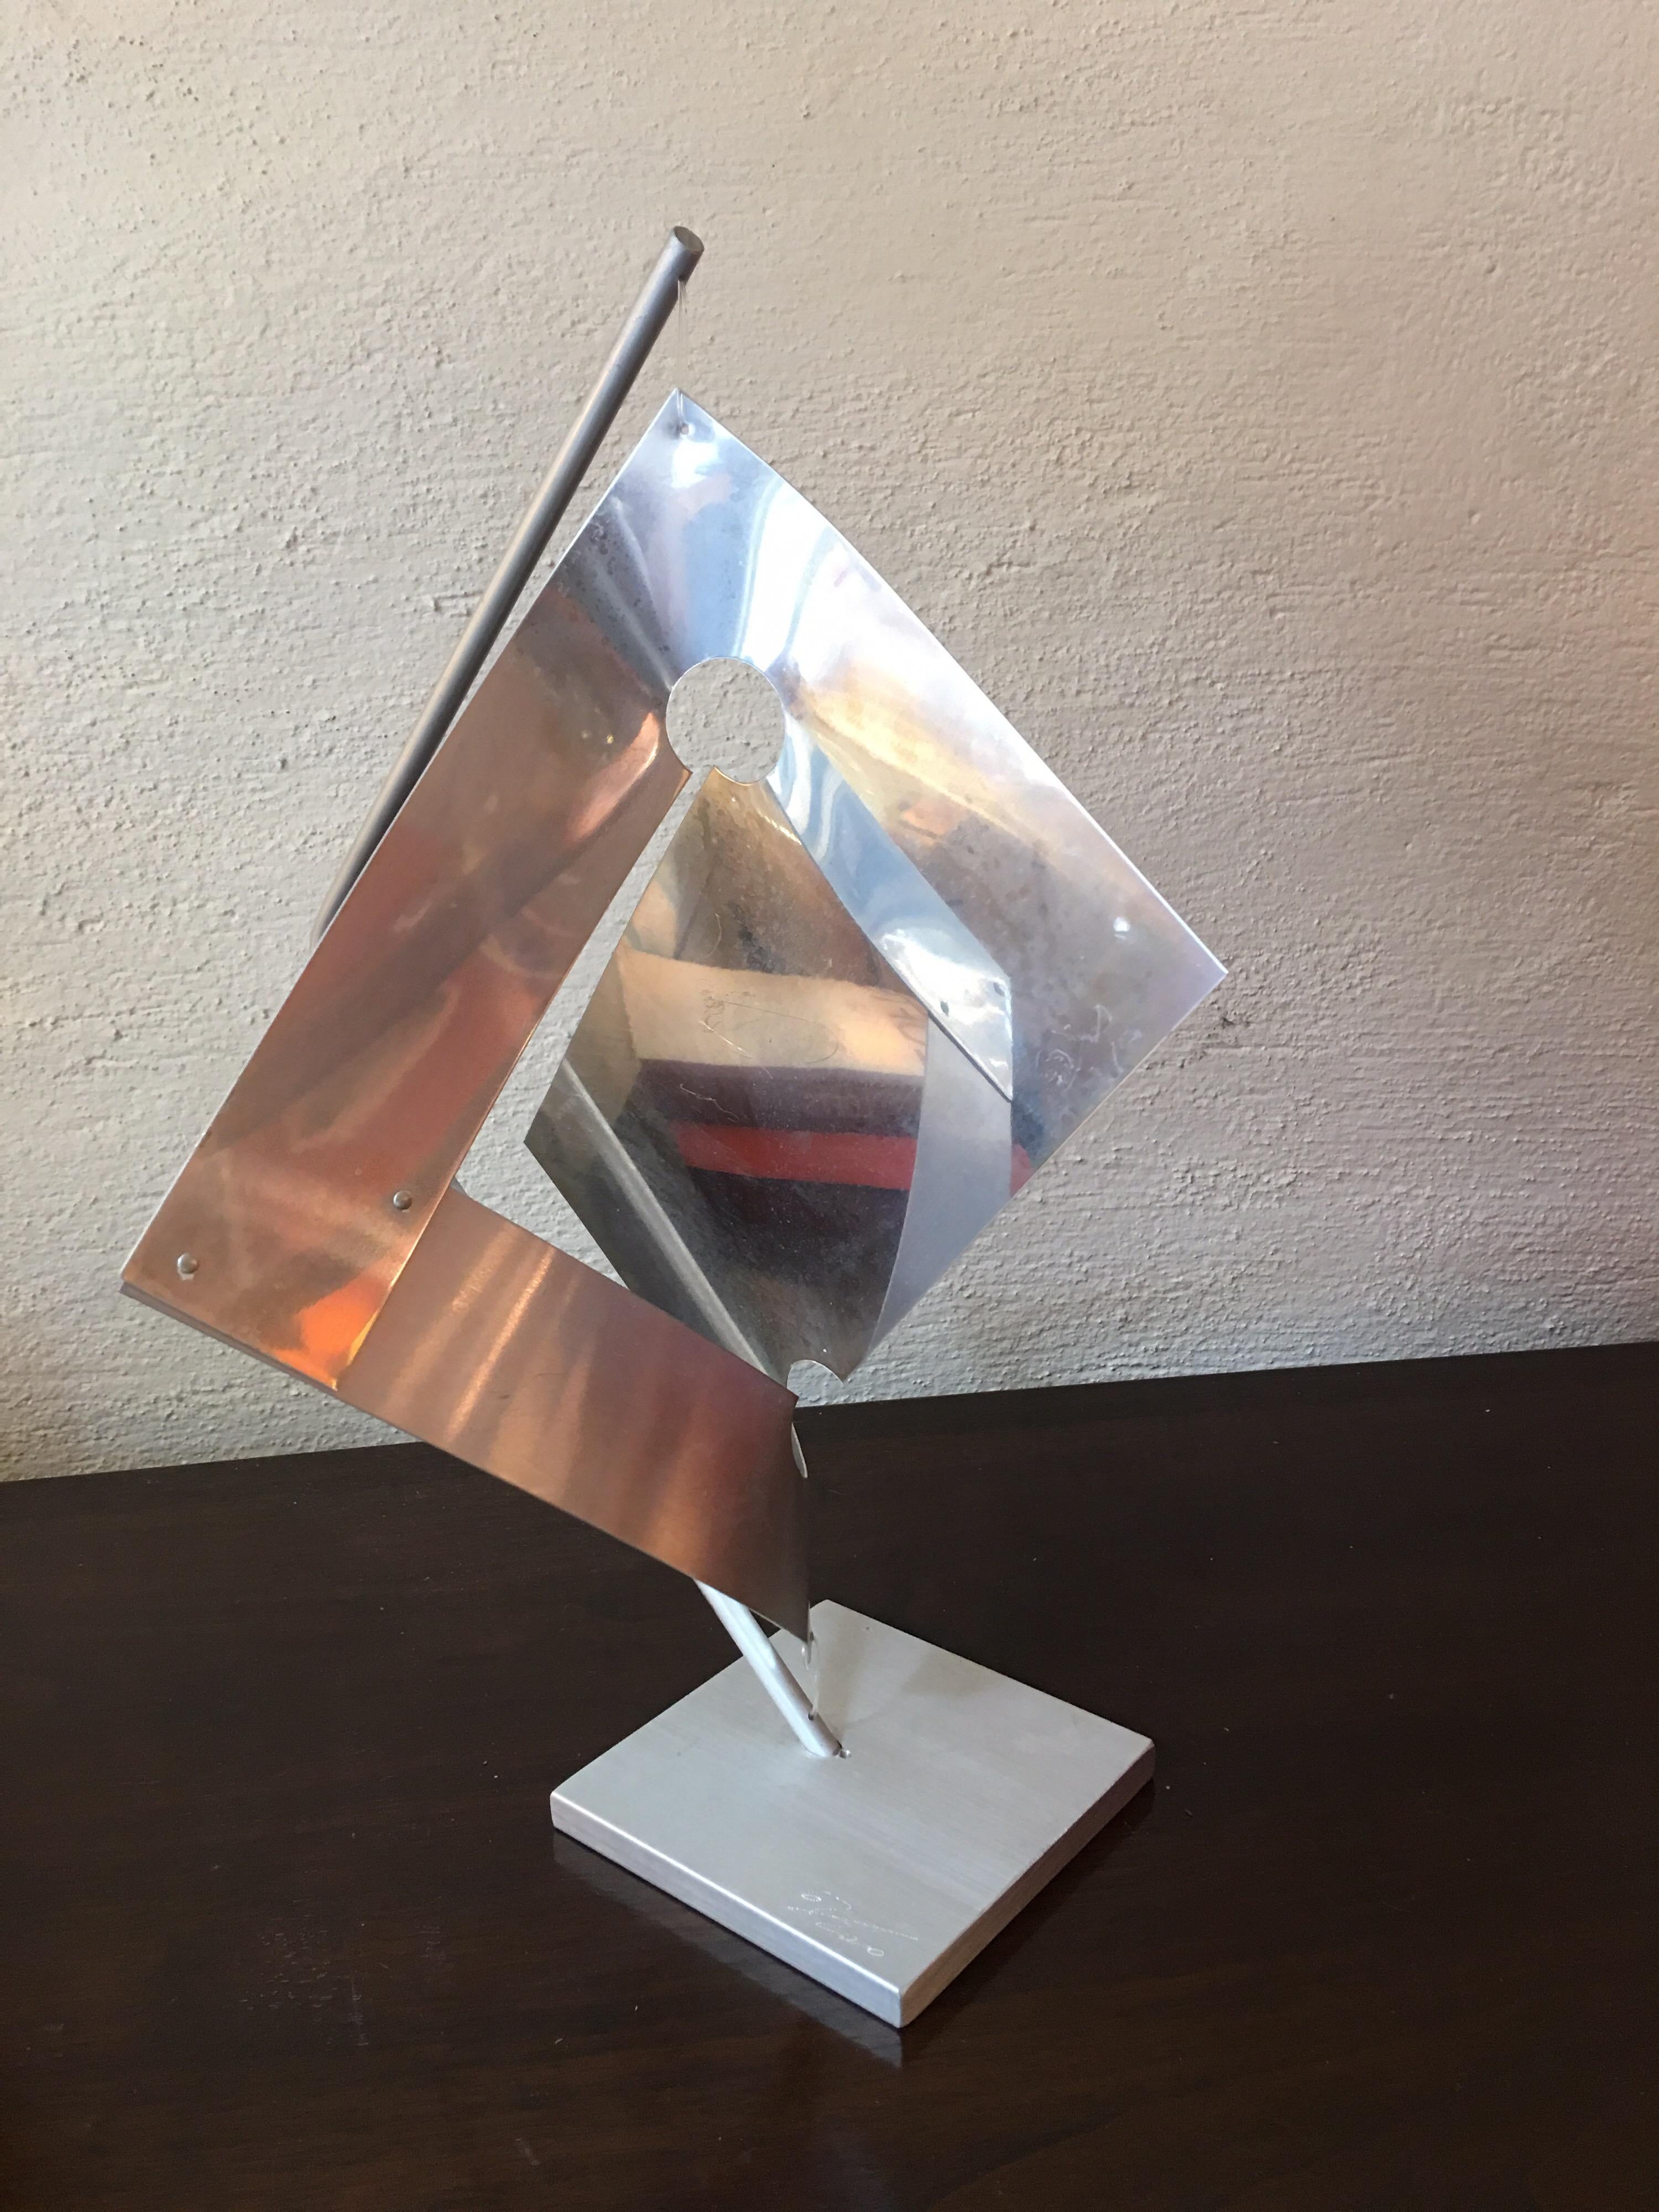 Remo Saraceni Marquette sculpture, signed and numbered 1977 67/200. Aluminum study held in place with fish line top and bottom.